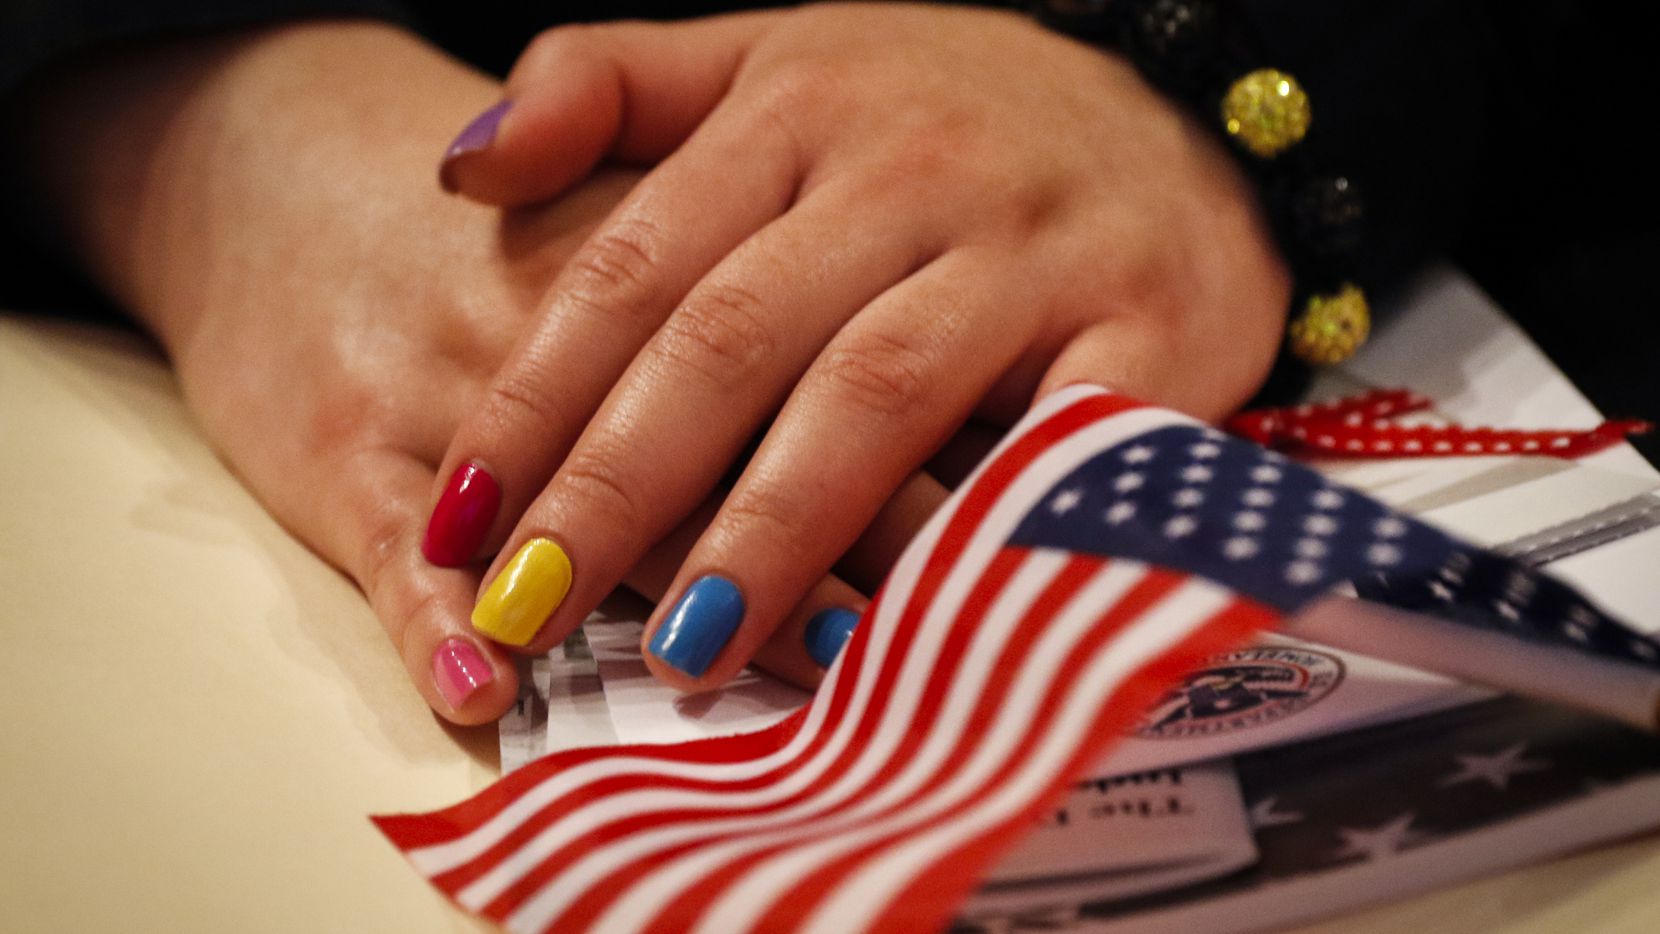 Alicia Pantoja, who is native to Mexico, hold an American flag and several documents during a U.S. Citizenship and Immigration Services naturalization ceremony for 50 immigrants from 22 different countries at the Dallas Museum of Art in Dallas on  April 6, 2015. (Jim Tuttle/The Dallas Morning News)